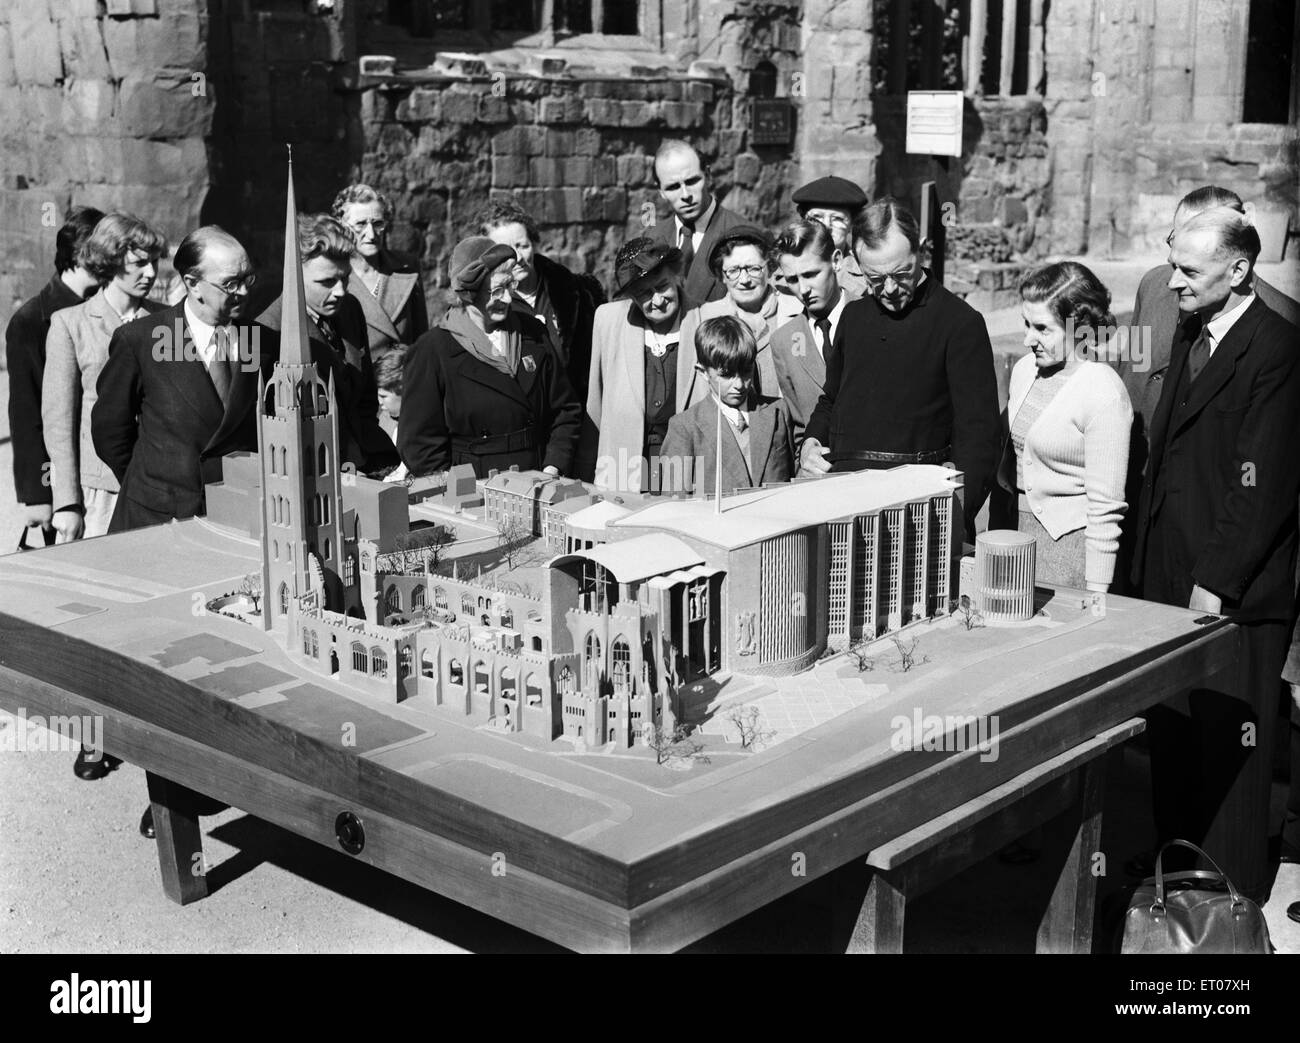 A model of Sir Basil Spence new cathedral for Coventry, West Midlands (formerly Warwickshire) is displayed in the ruins of the old medieval cathedral which was destroyed by the German airforce in the blitz of November 1940. Circa 1952 Stock Photo